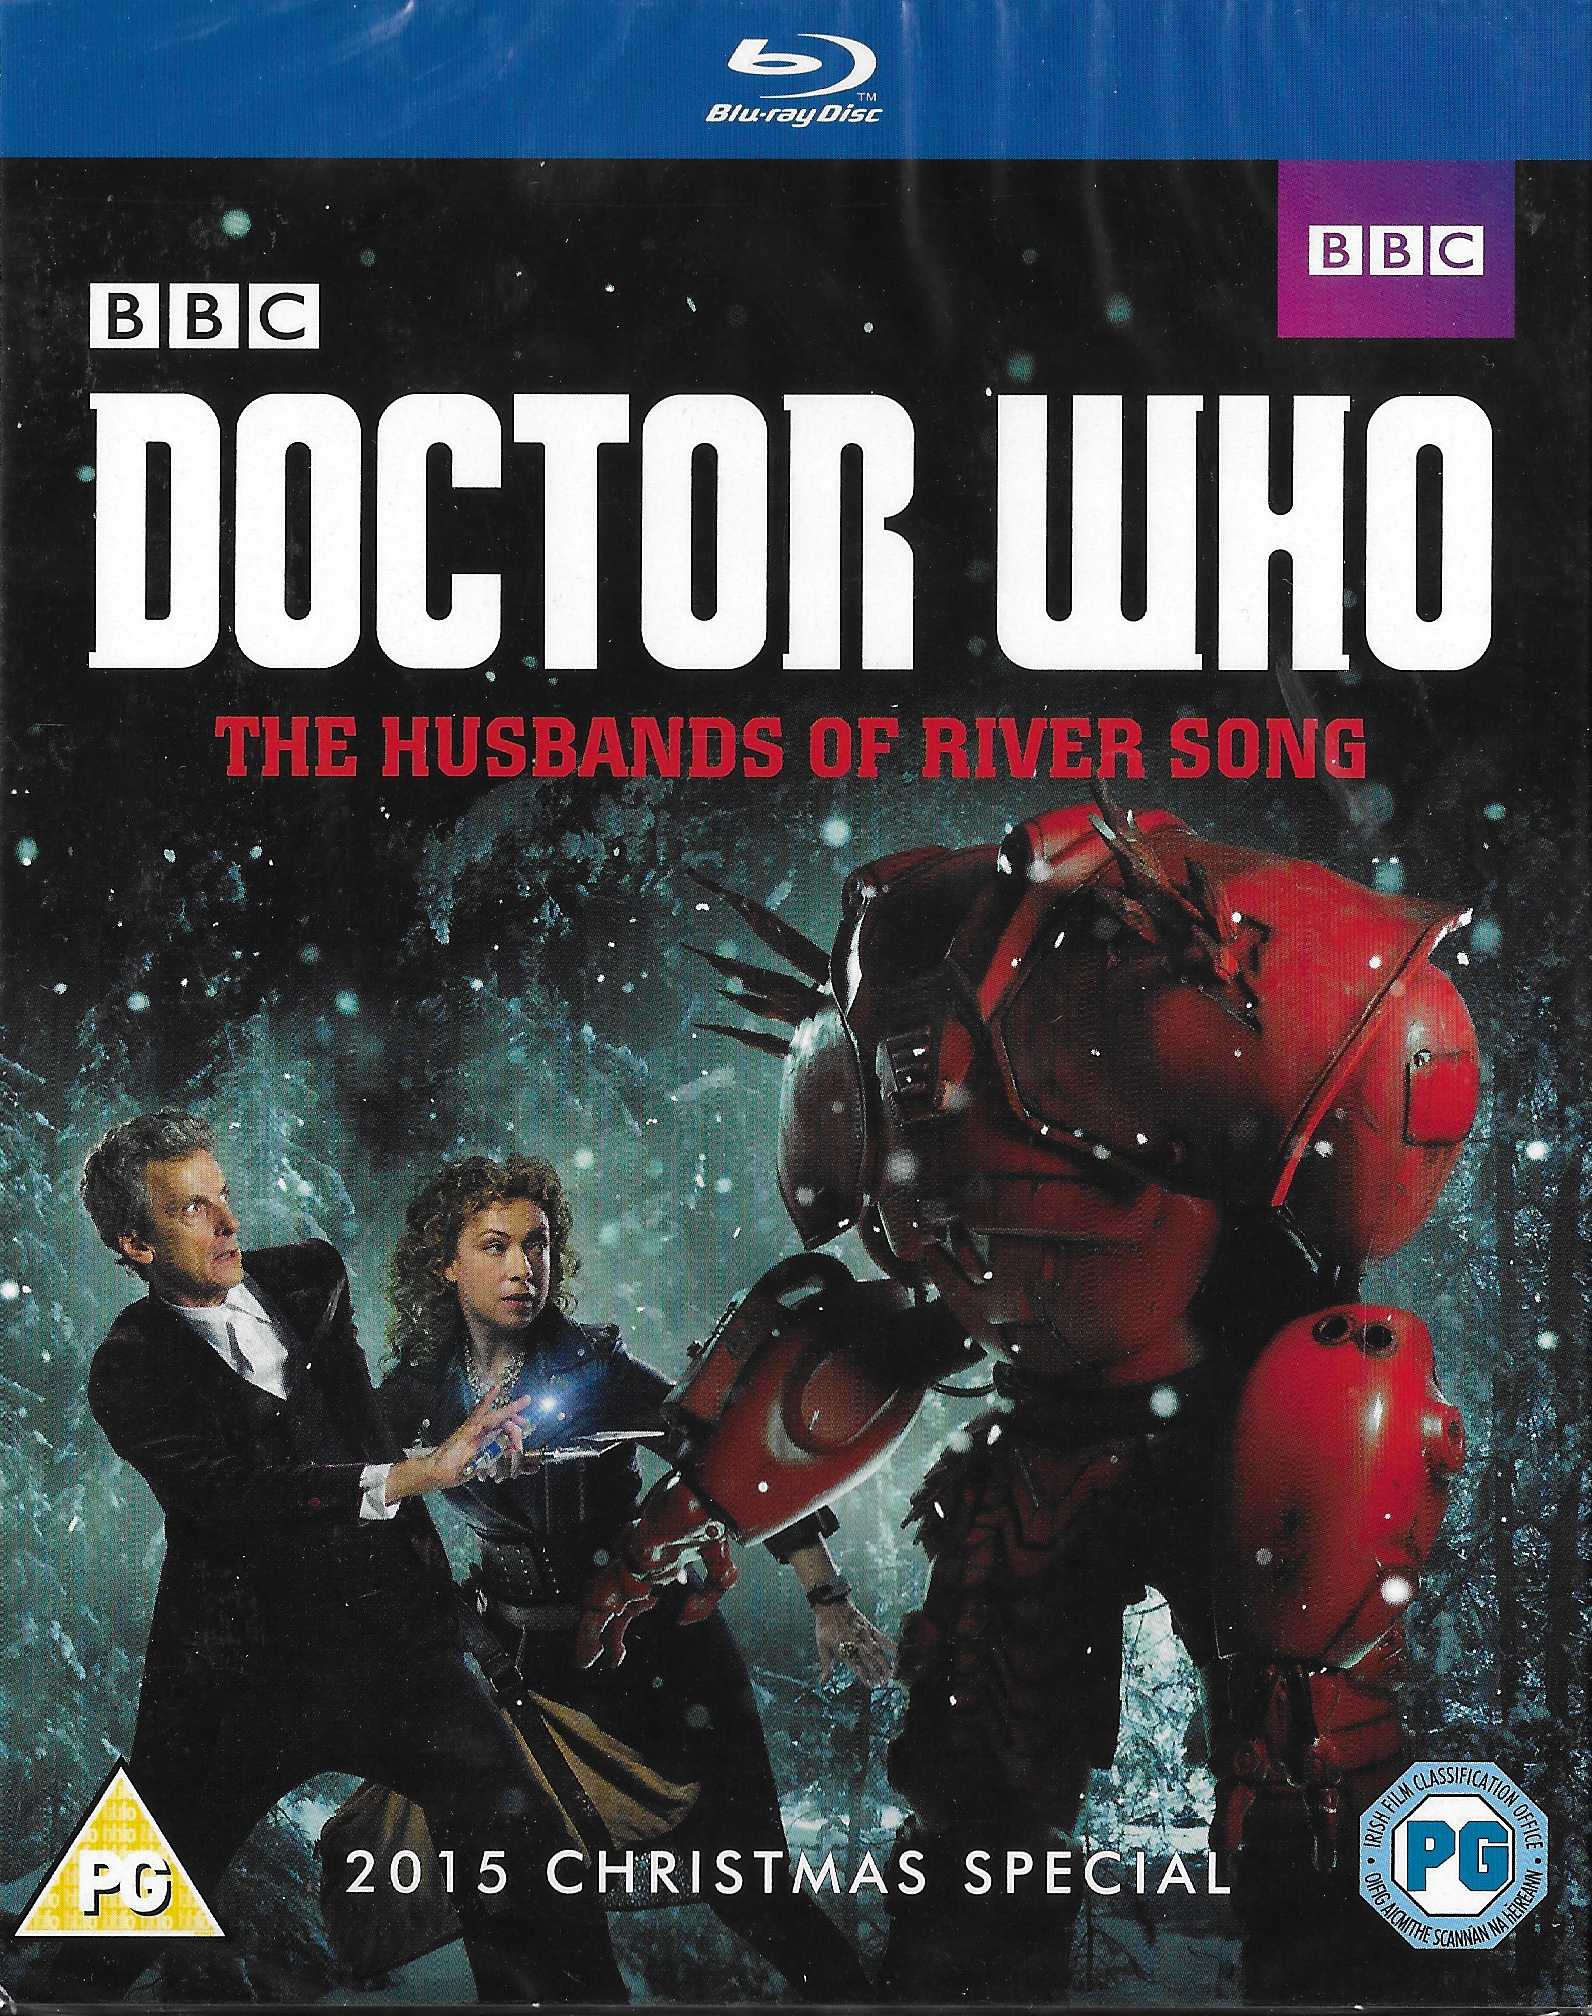 Picture of BBCBD 0332 Doctor Who - The husbands of River Song by artist Steven Moffat from the BBC blu-rays - Records and Tapes library